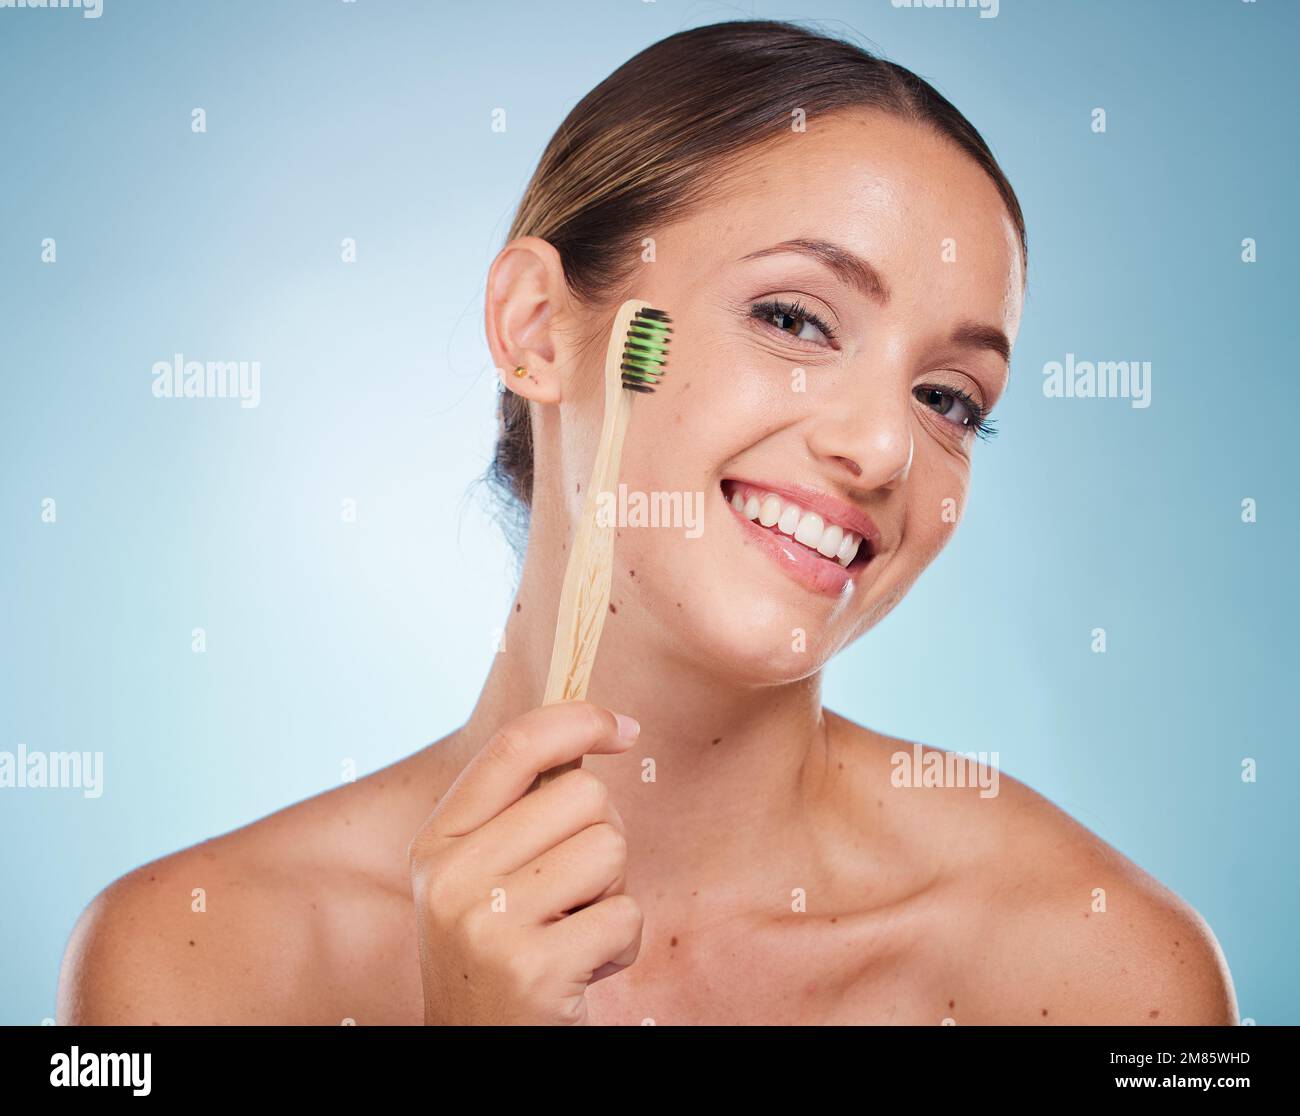 Brushing teeth, dental and woman with toothbrush for teeth whitening and beauty, oral health and fresh breath with studio background. Mouth wellness Stock Photo